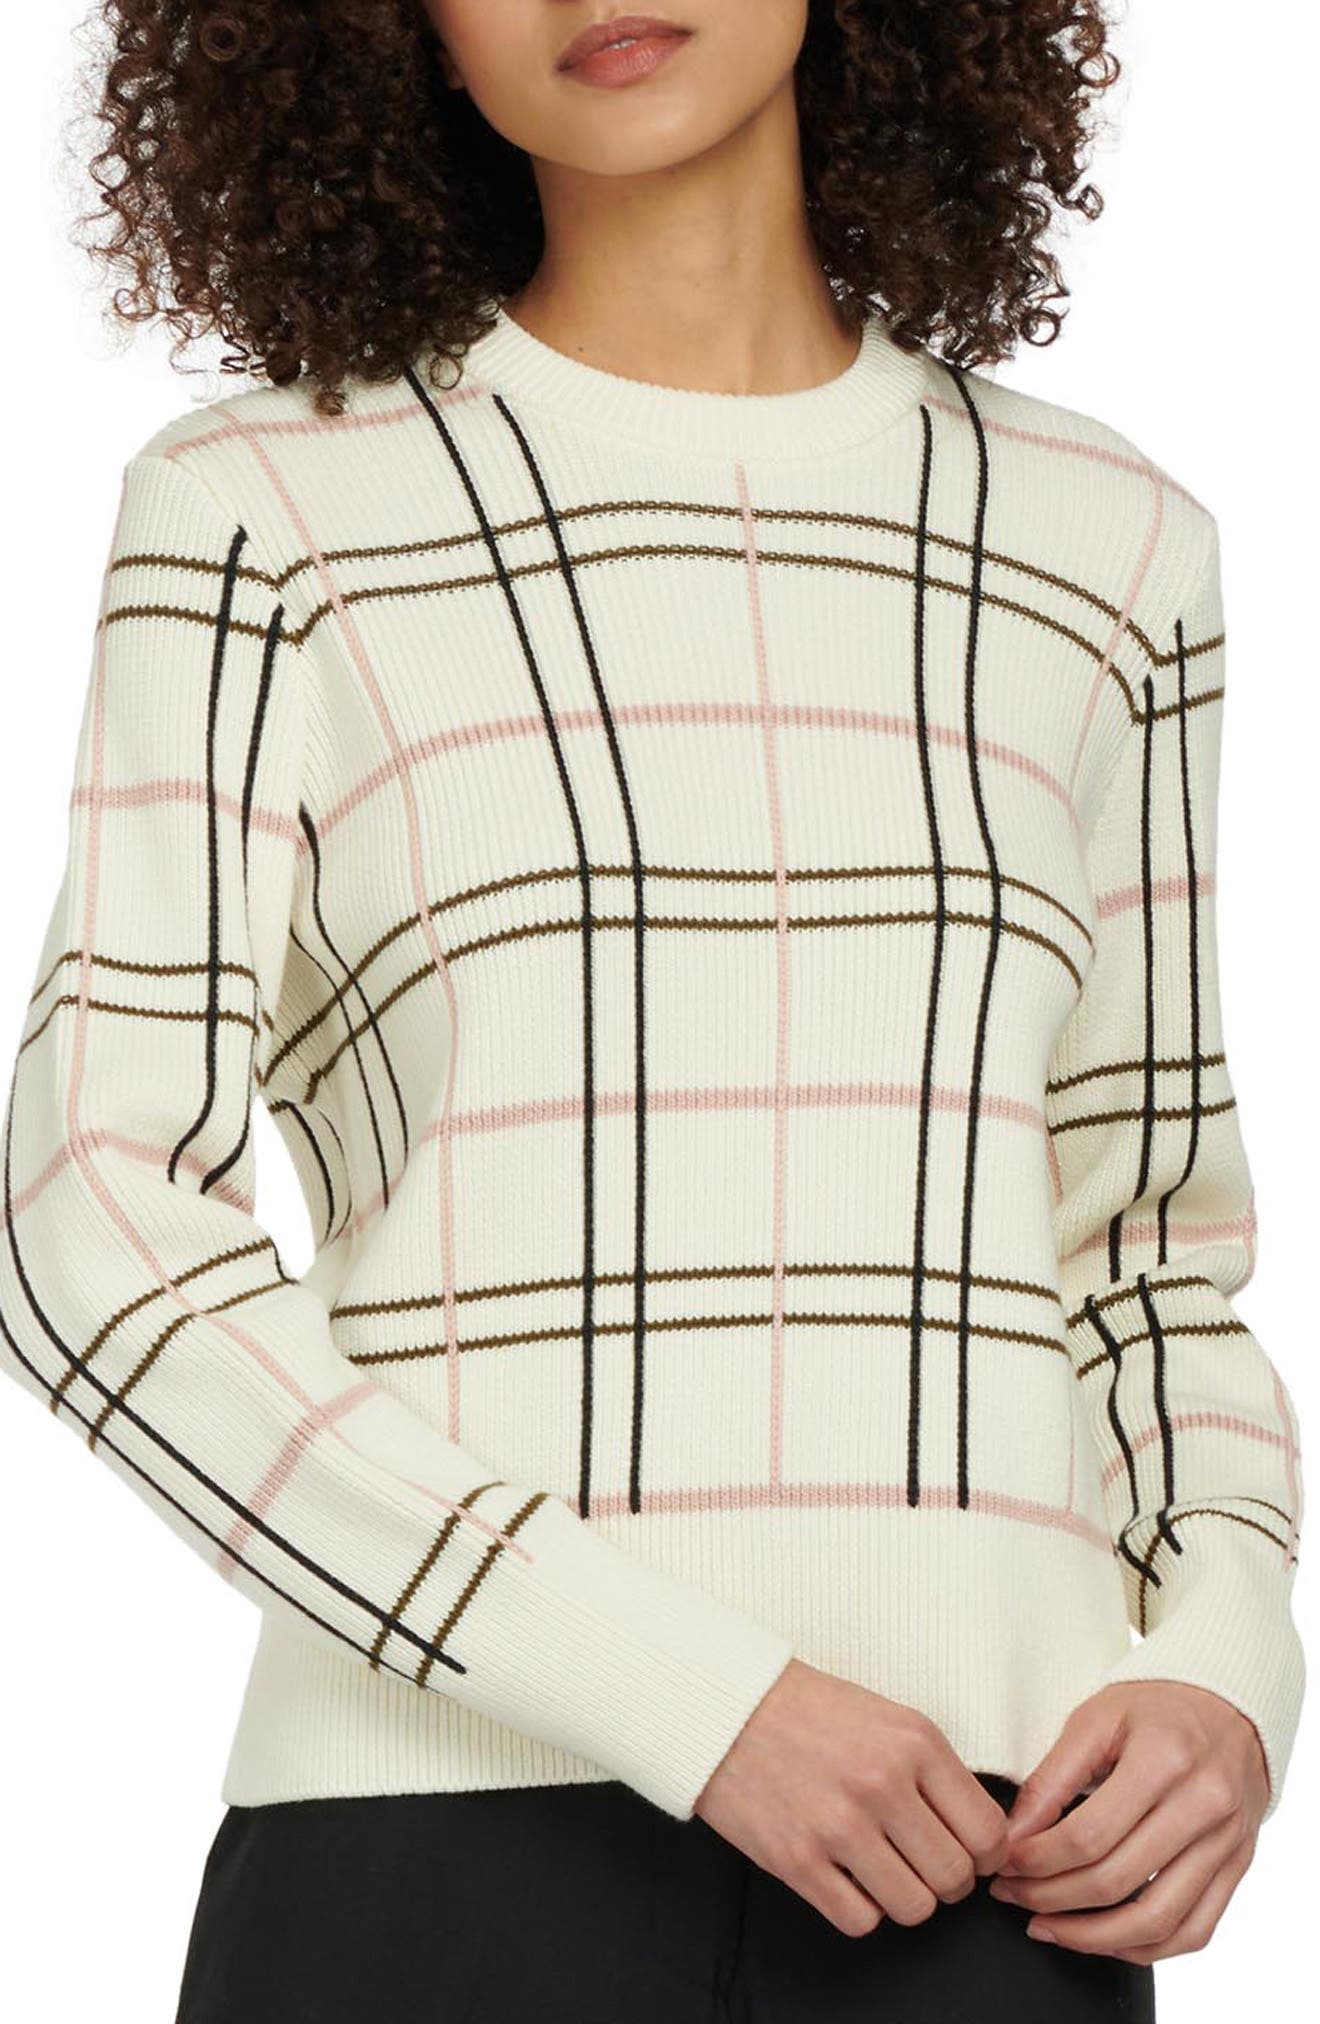 Barbour Rosefiled Knit Wool Blend Sweater in Whisper at Nordstrom